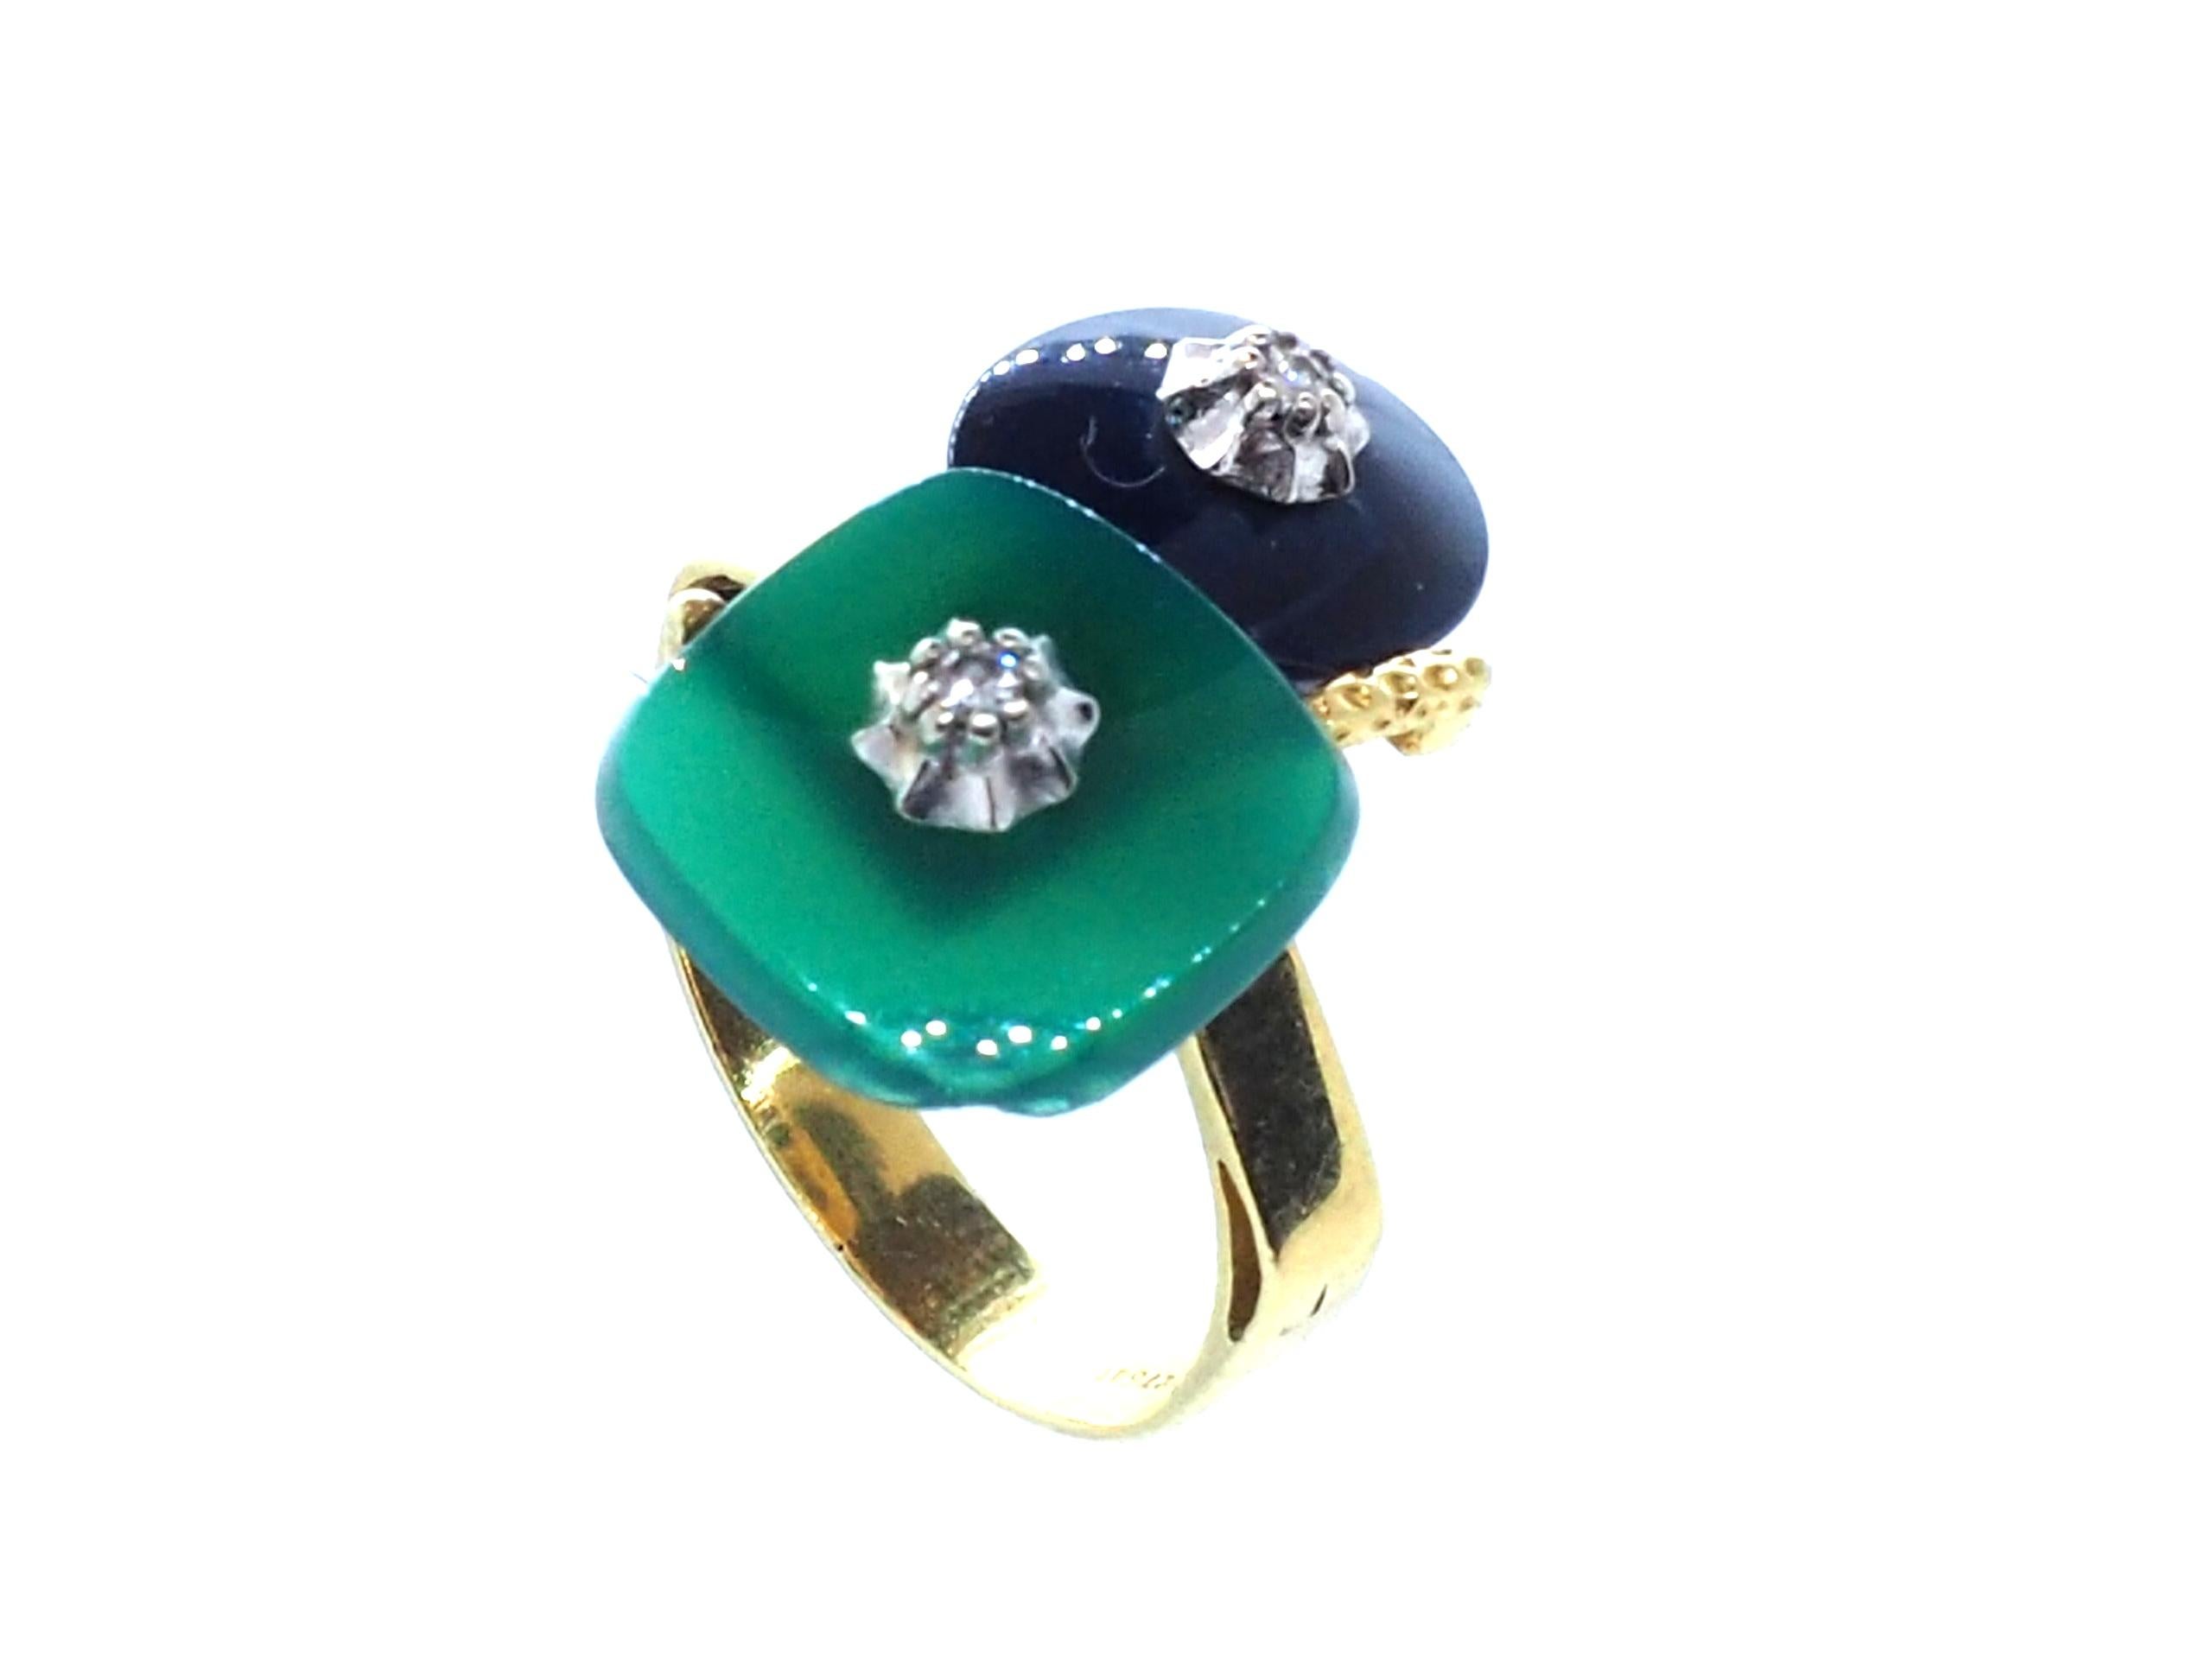 Discover timeless elegance with this exquisite 18K yellow gold geometric ring, adorned with vibrant jade and lapis lazuli gemstones, accented by two small diamonds. 

The unique design combines geometric shapes with natural beauty, creating a